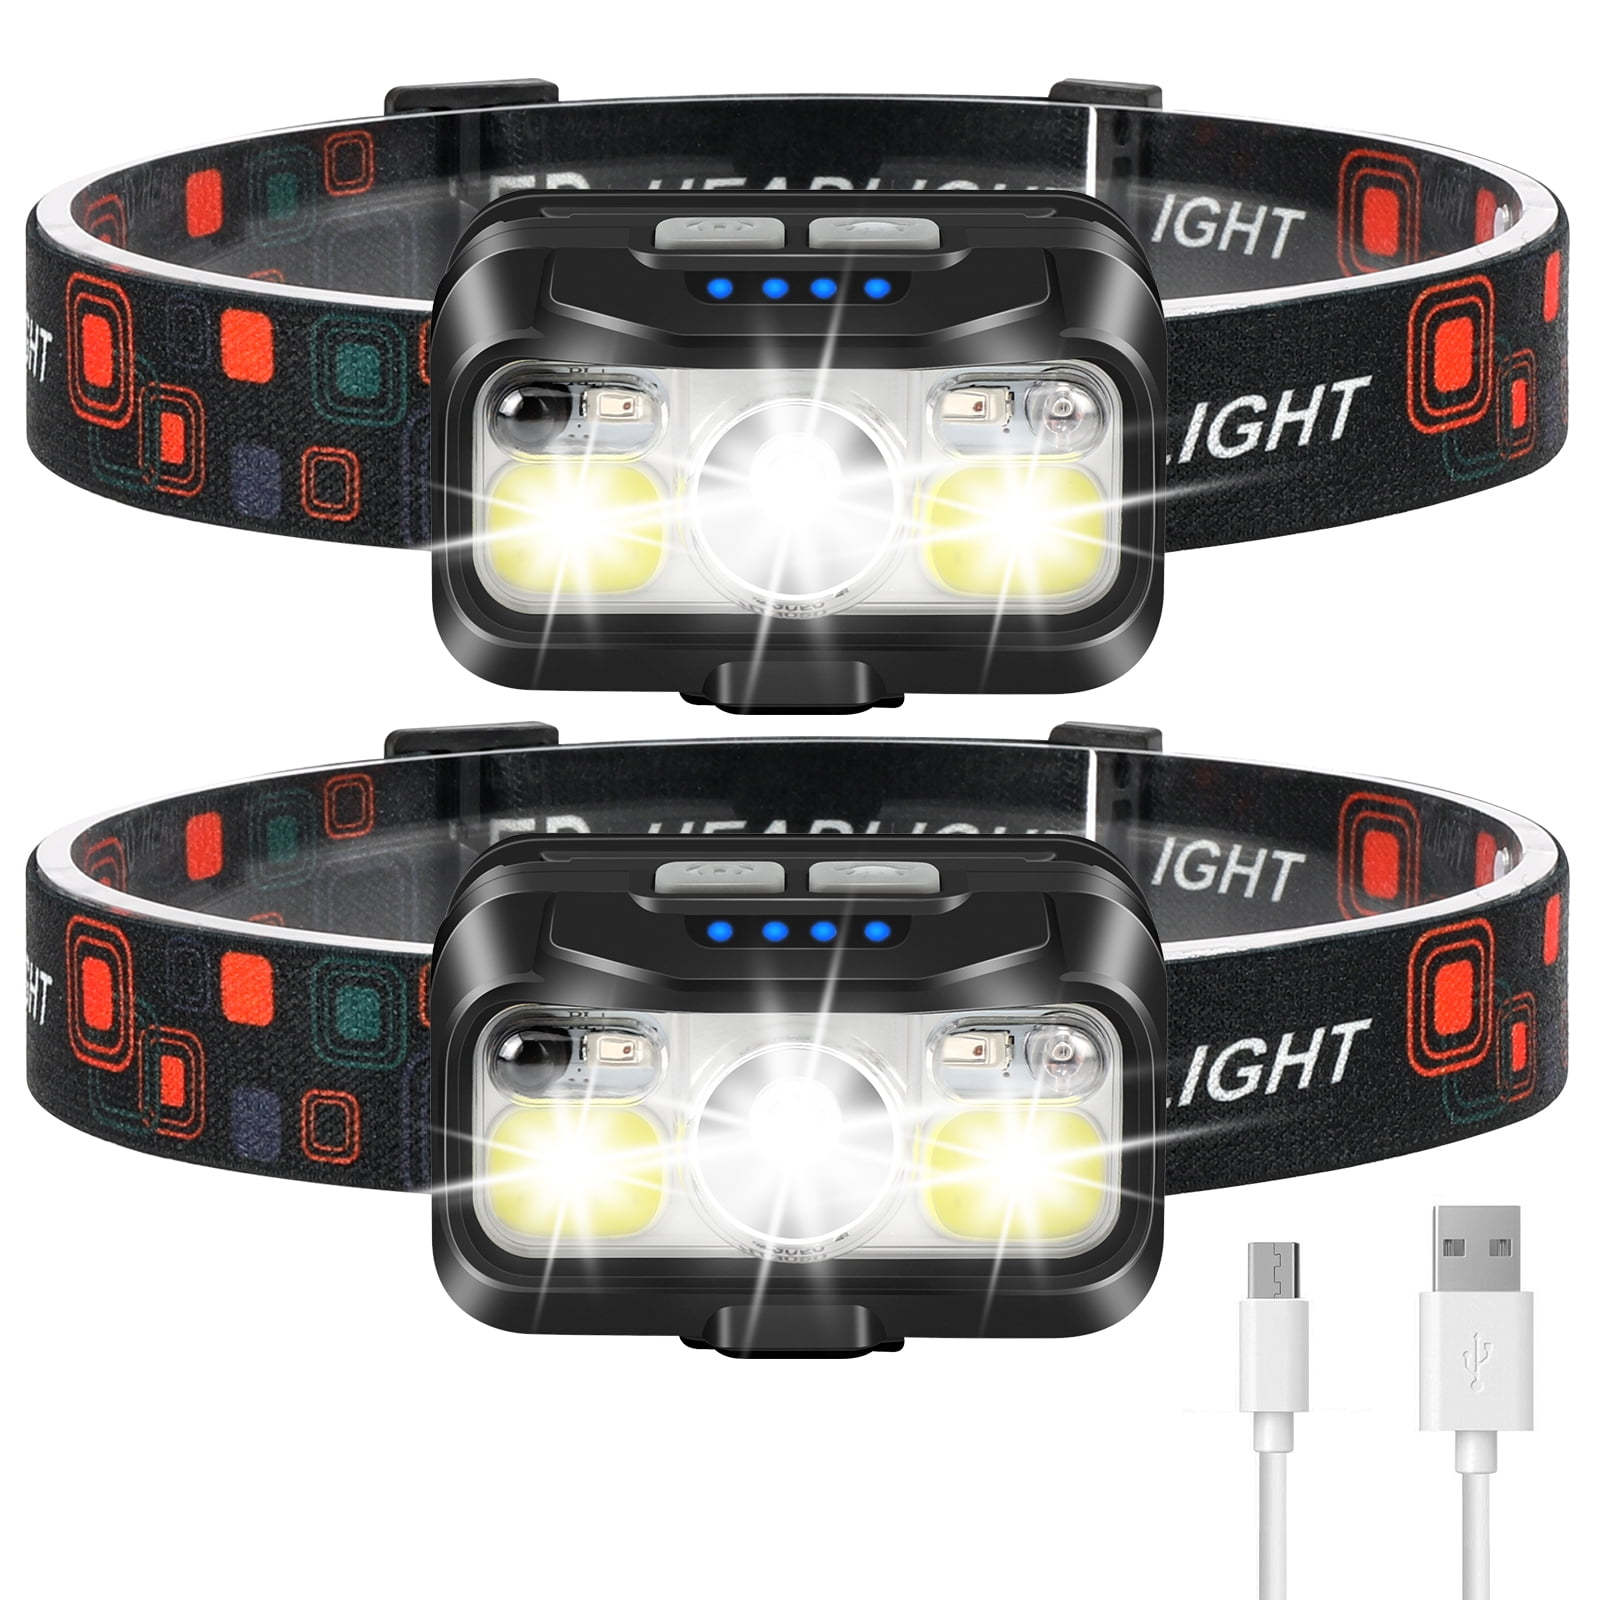 head lamps for adults Rechargeable Headlamp Foxdott 8 LED Headlamp Flashlight with White Red Lights,8 Modes USB Rechargeable Waterproof Head Lamp for Outdoor Camping Cycling Running Fishing